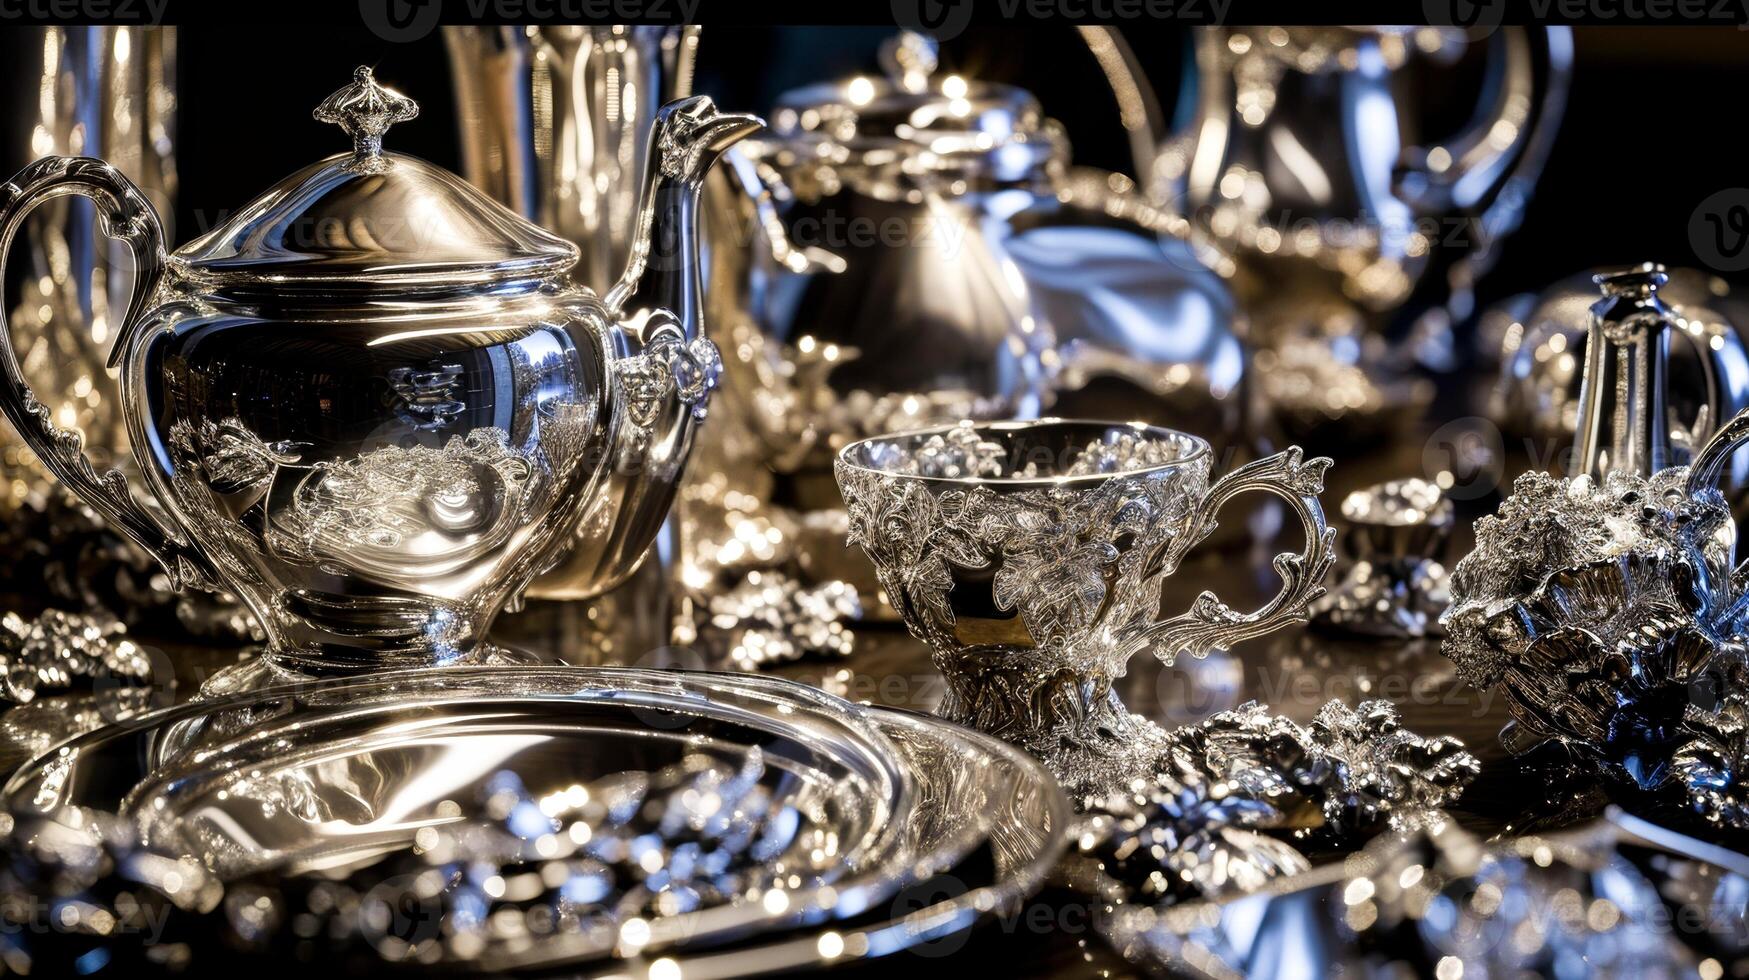 AI Generated A luxurious collection of polished antique silverware, intricately designed, elegantly displayed with reflections. luxury product marketing, or sophisticated interior decor imagery. photo